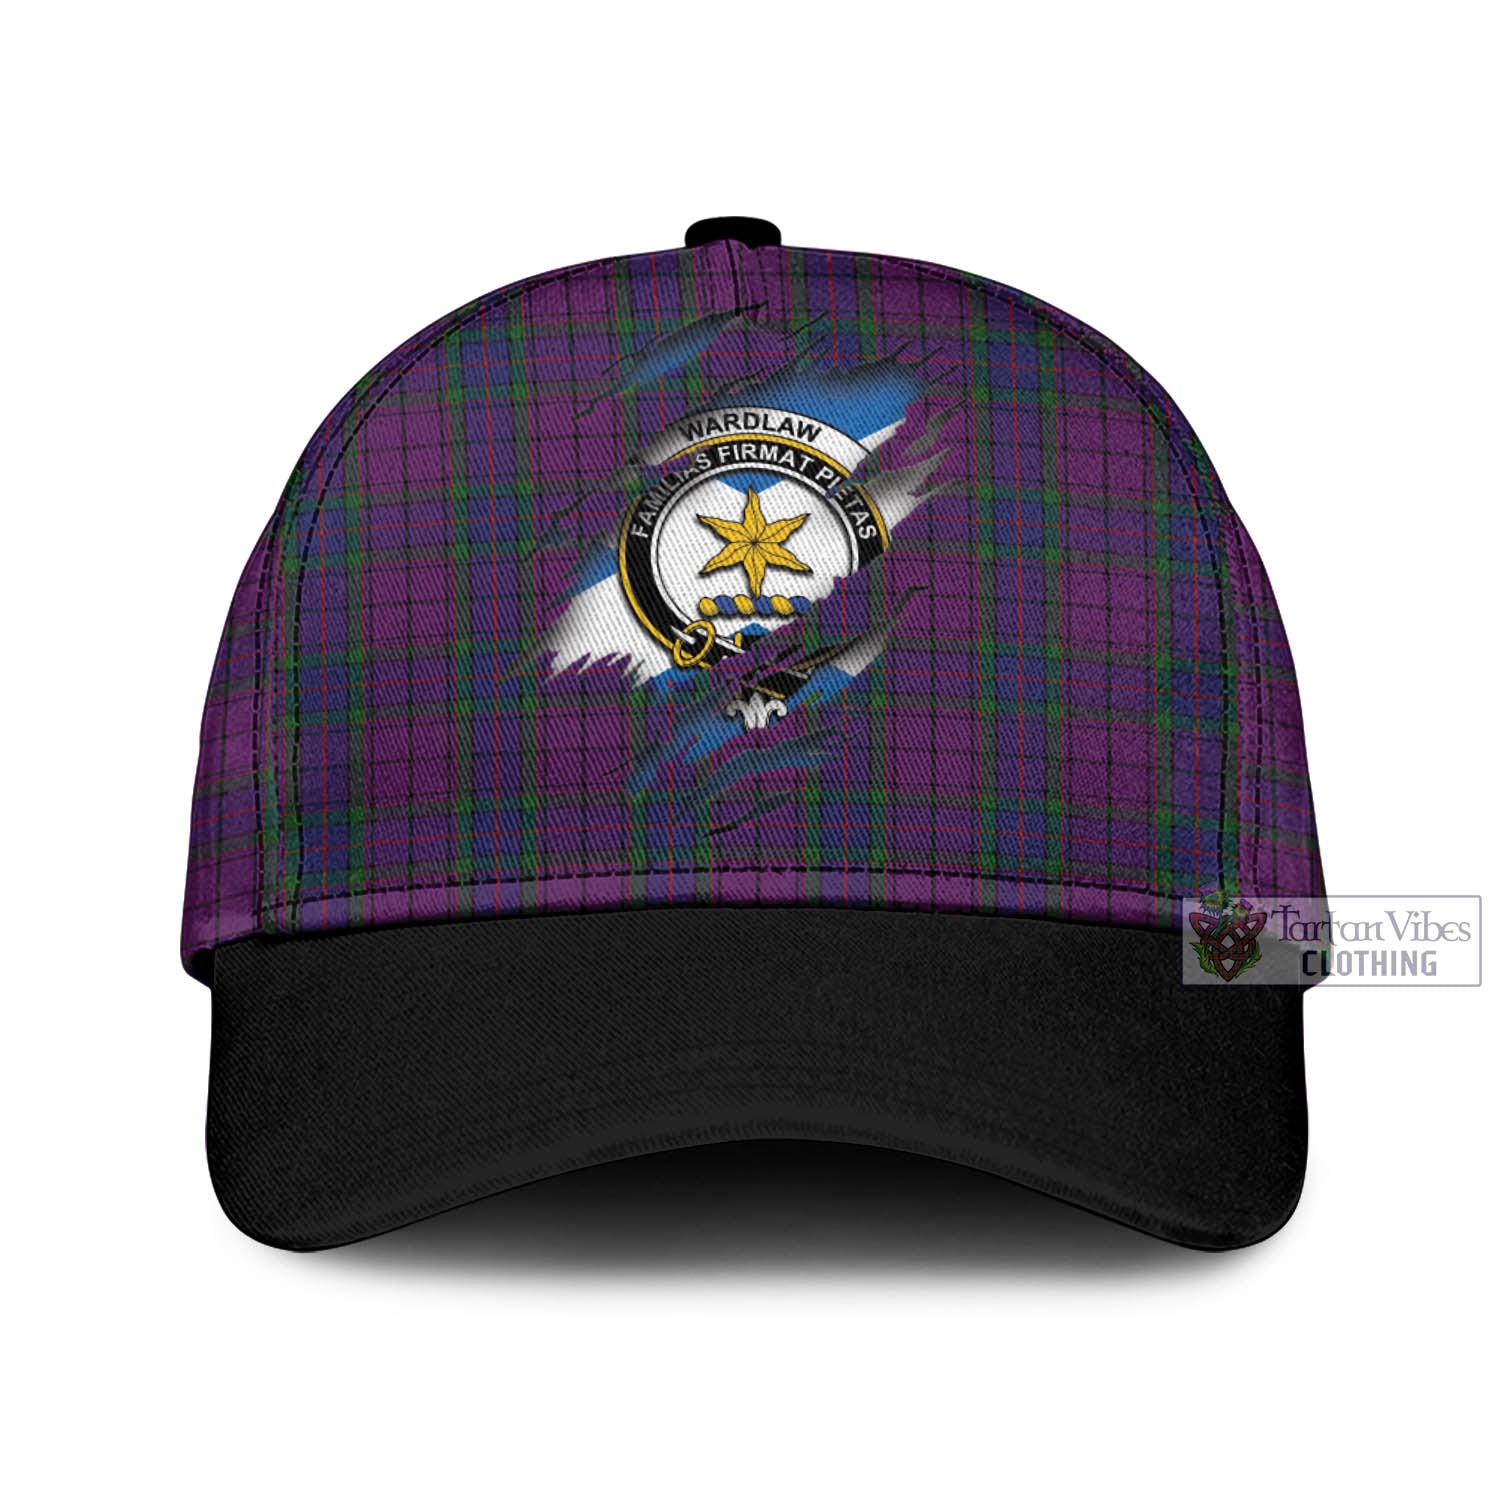 Tartan Vibes Clothing Wardlaw Tartan Classic Cap with Family Crest In Me Style